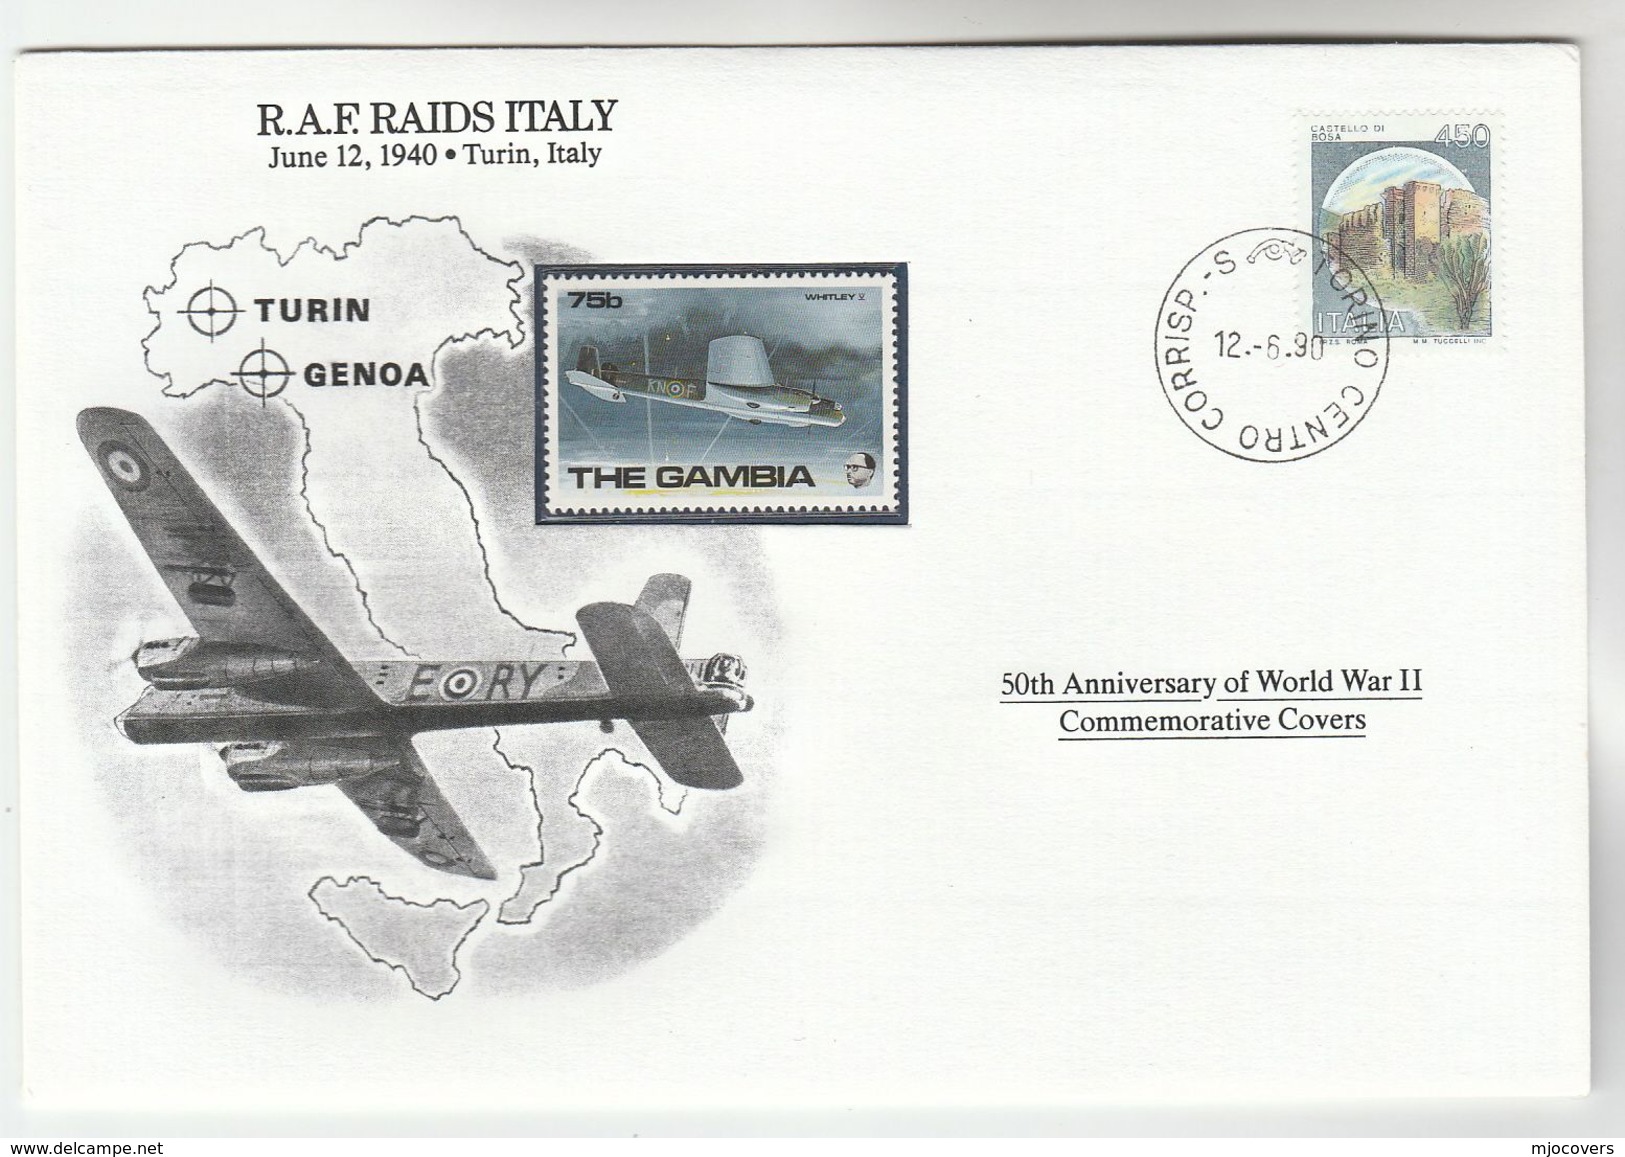 1990 Torino ITALY Special COVER Anniv WWII TURIN  RAF RAIDS Event Aviation Stamps Map - Guerre Mondiale (Seconde)